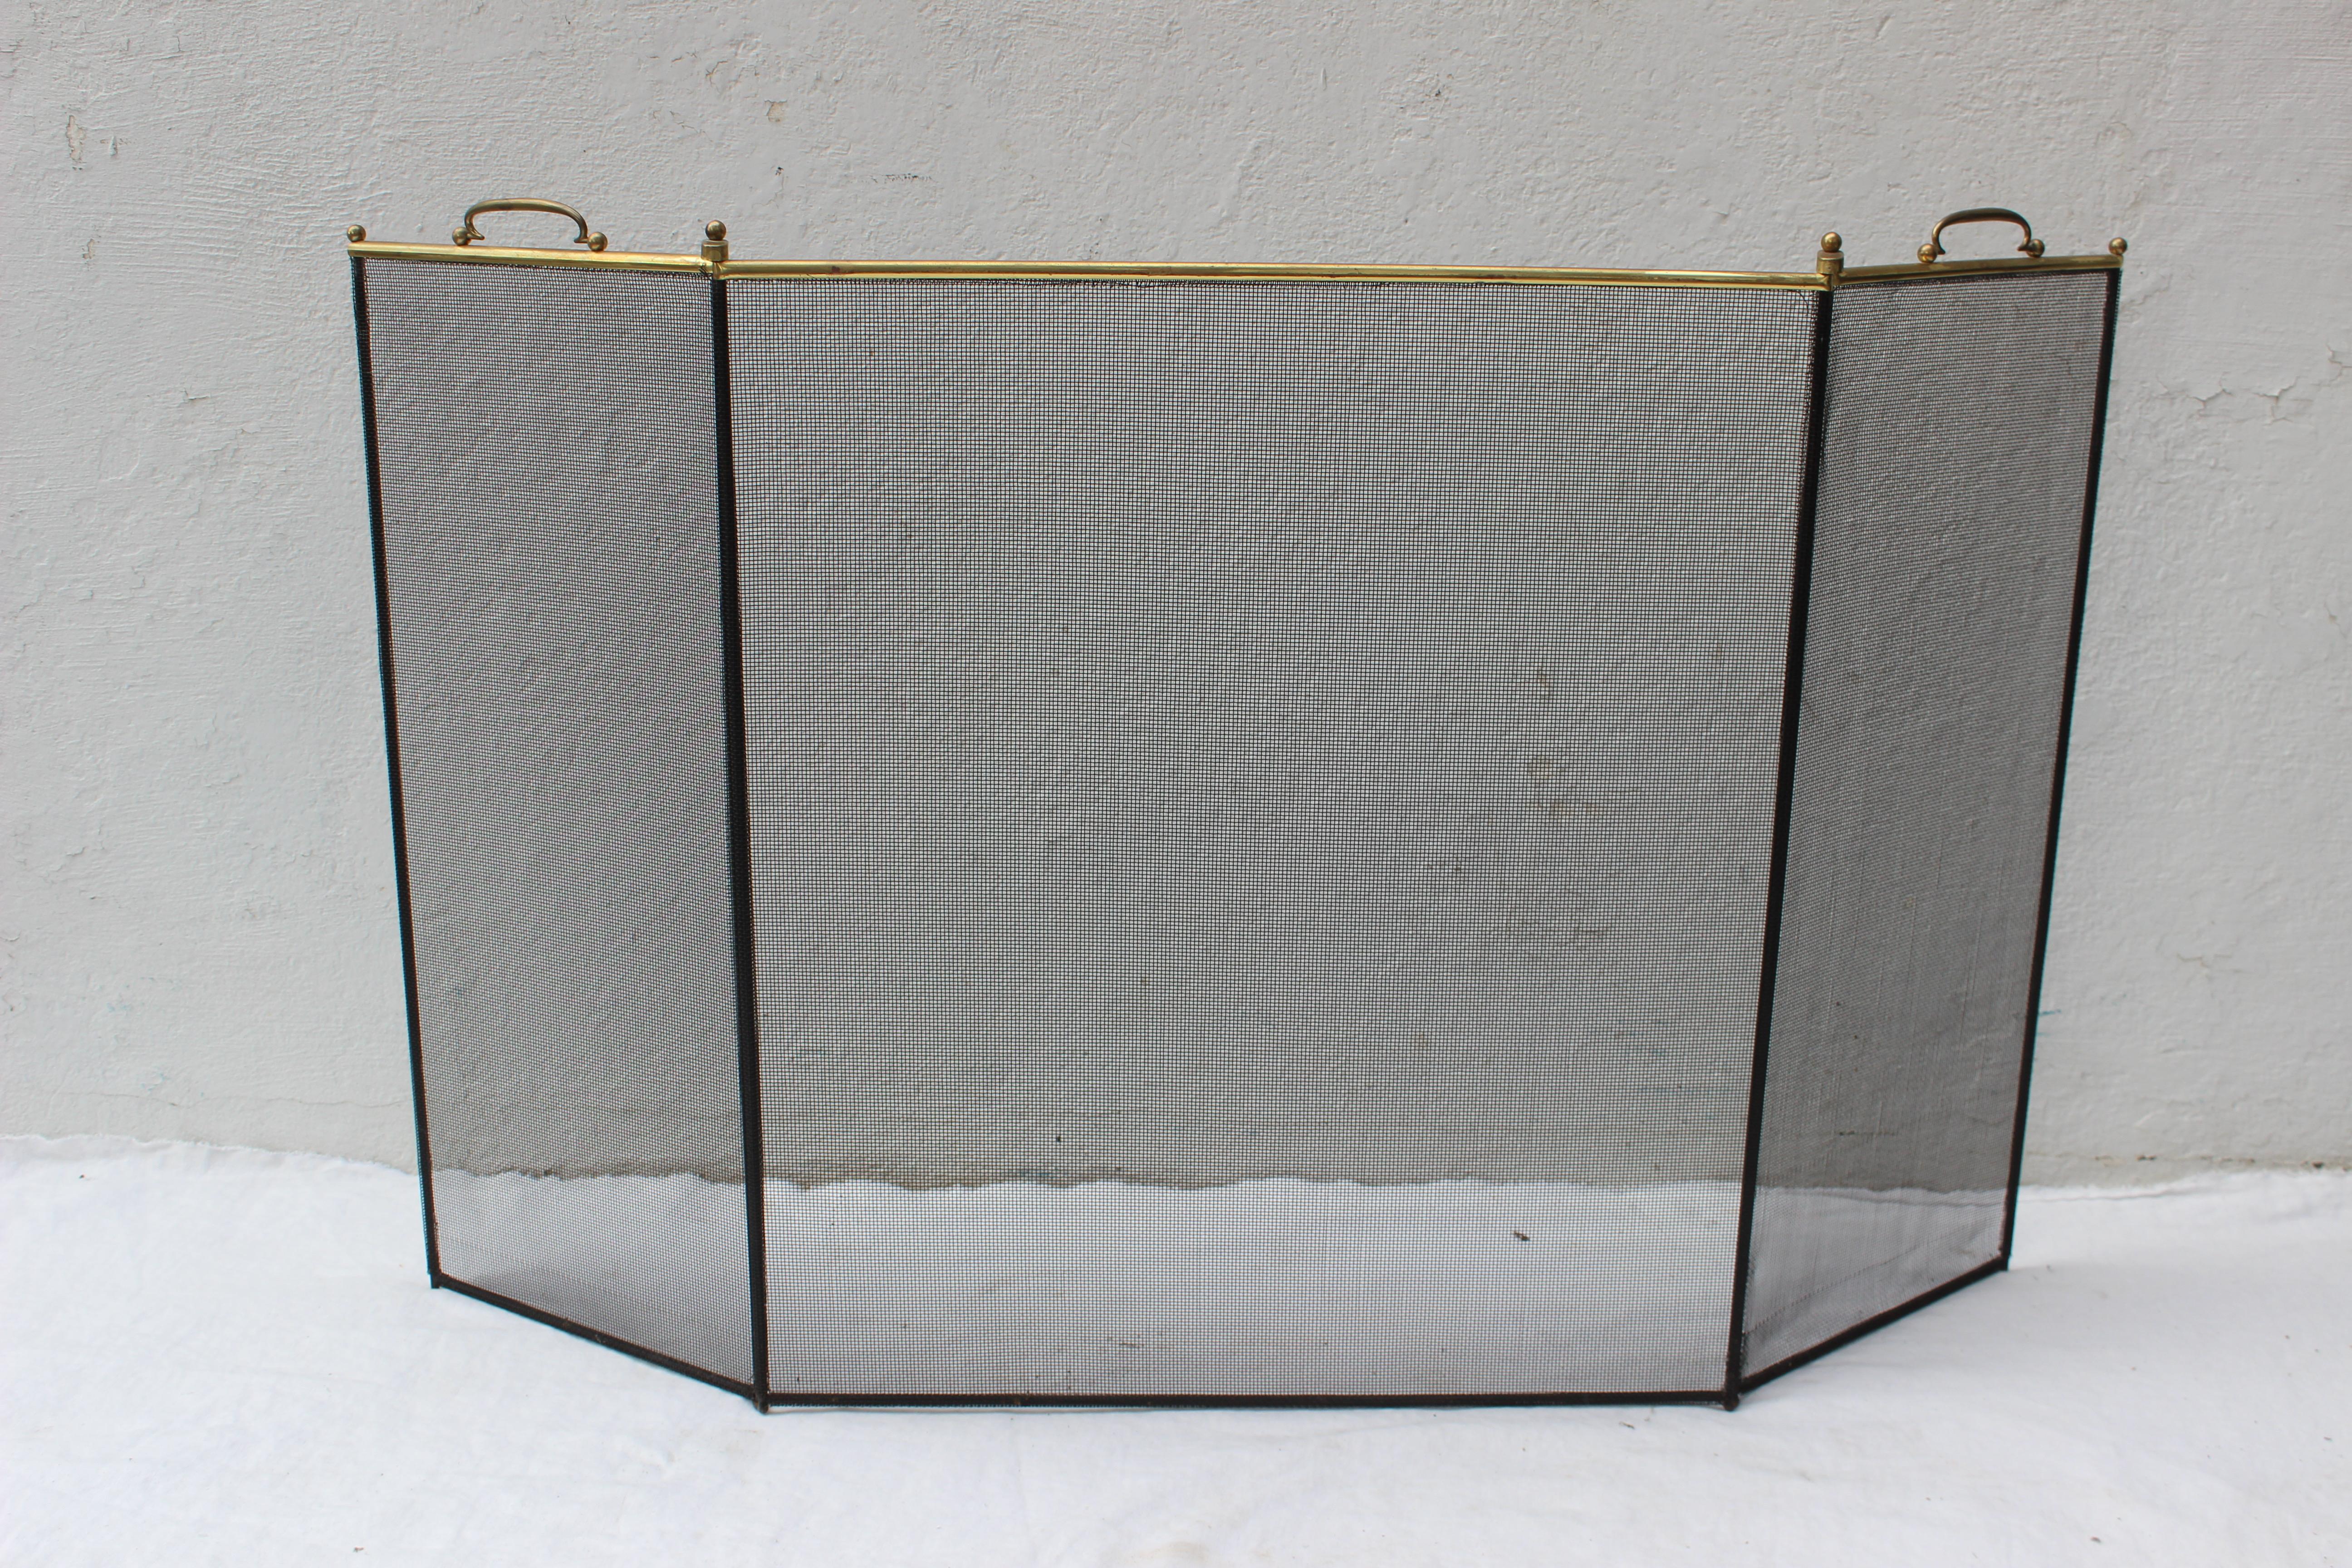 Brass and metal wire mesh fireplace screen
30